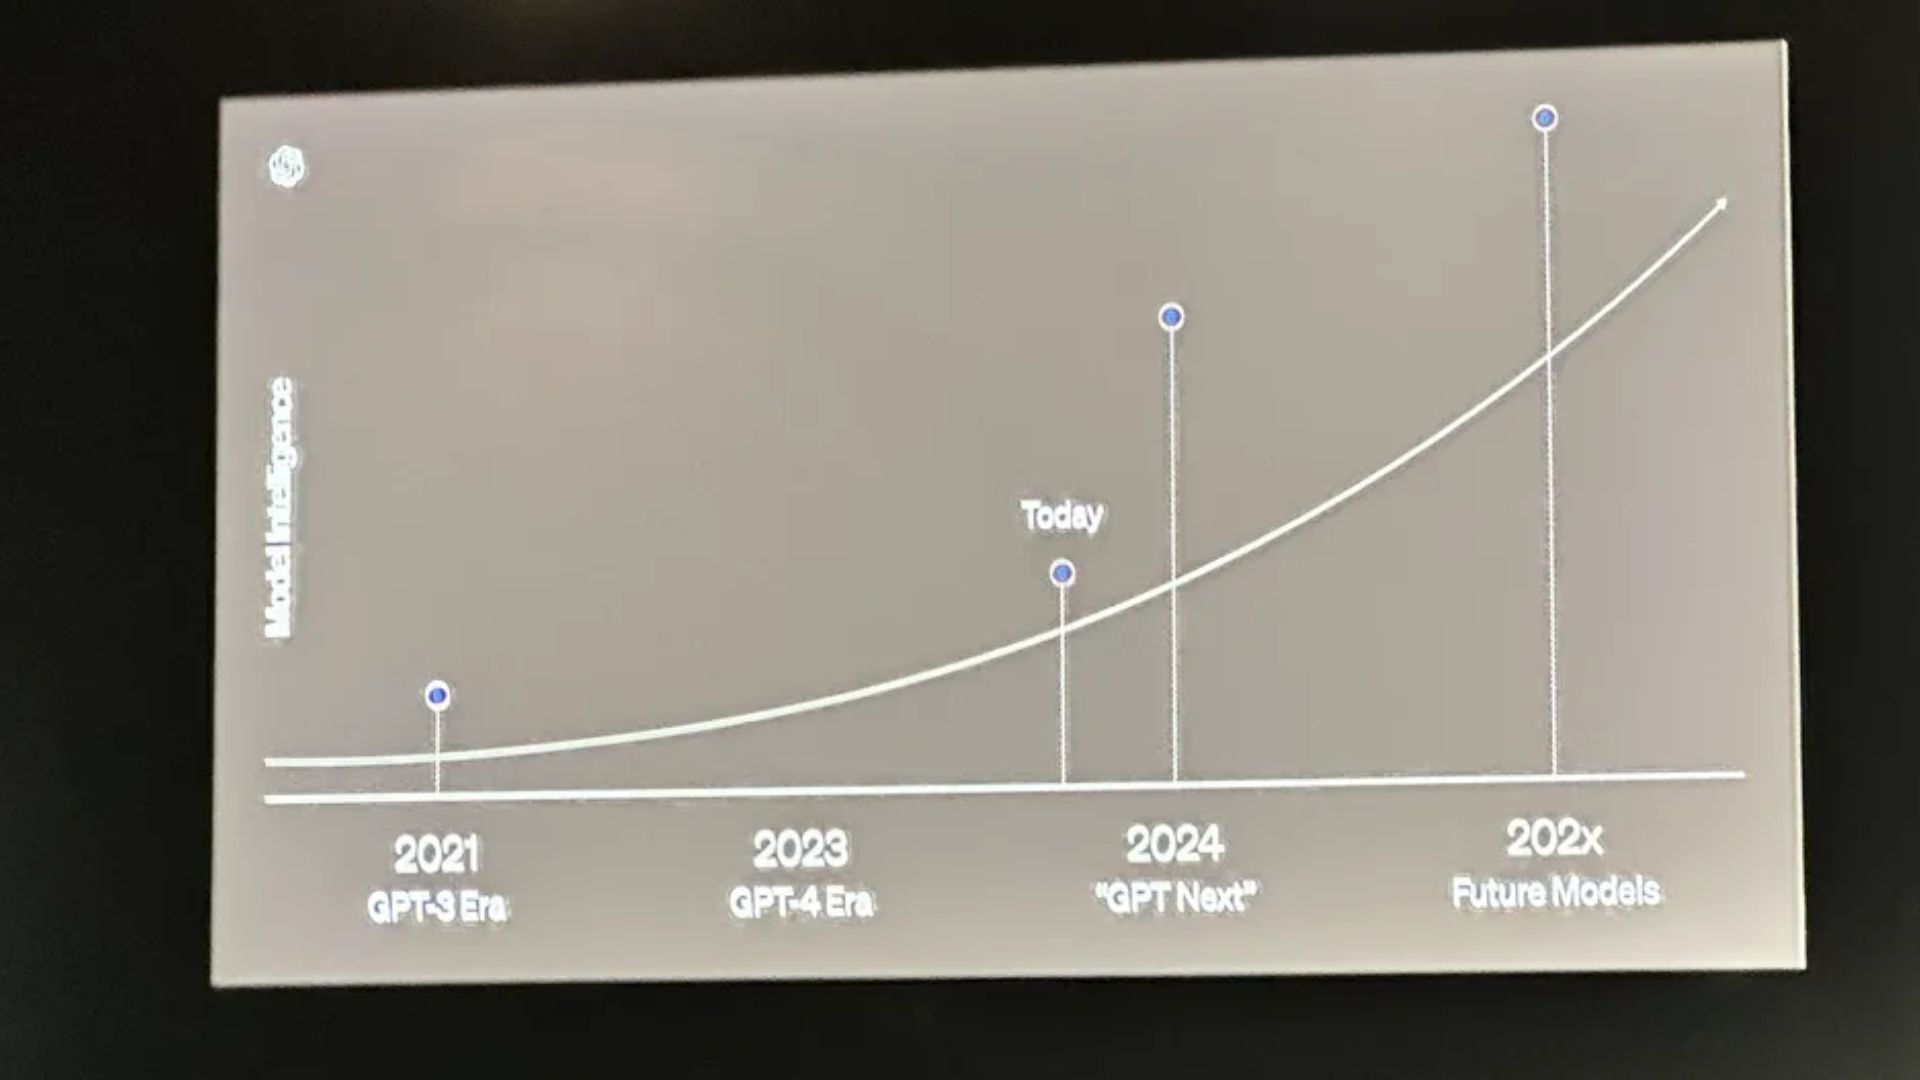 Progression and growth of OpenAI's models